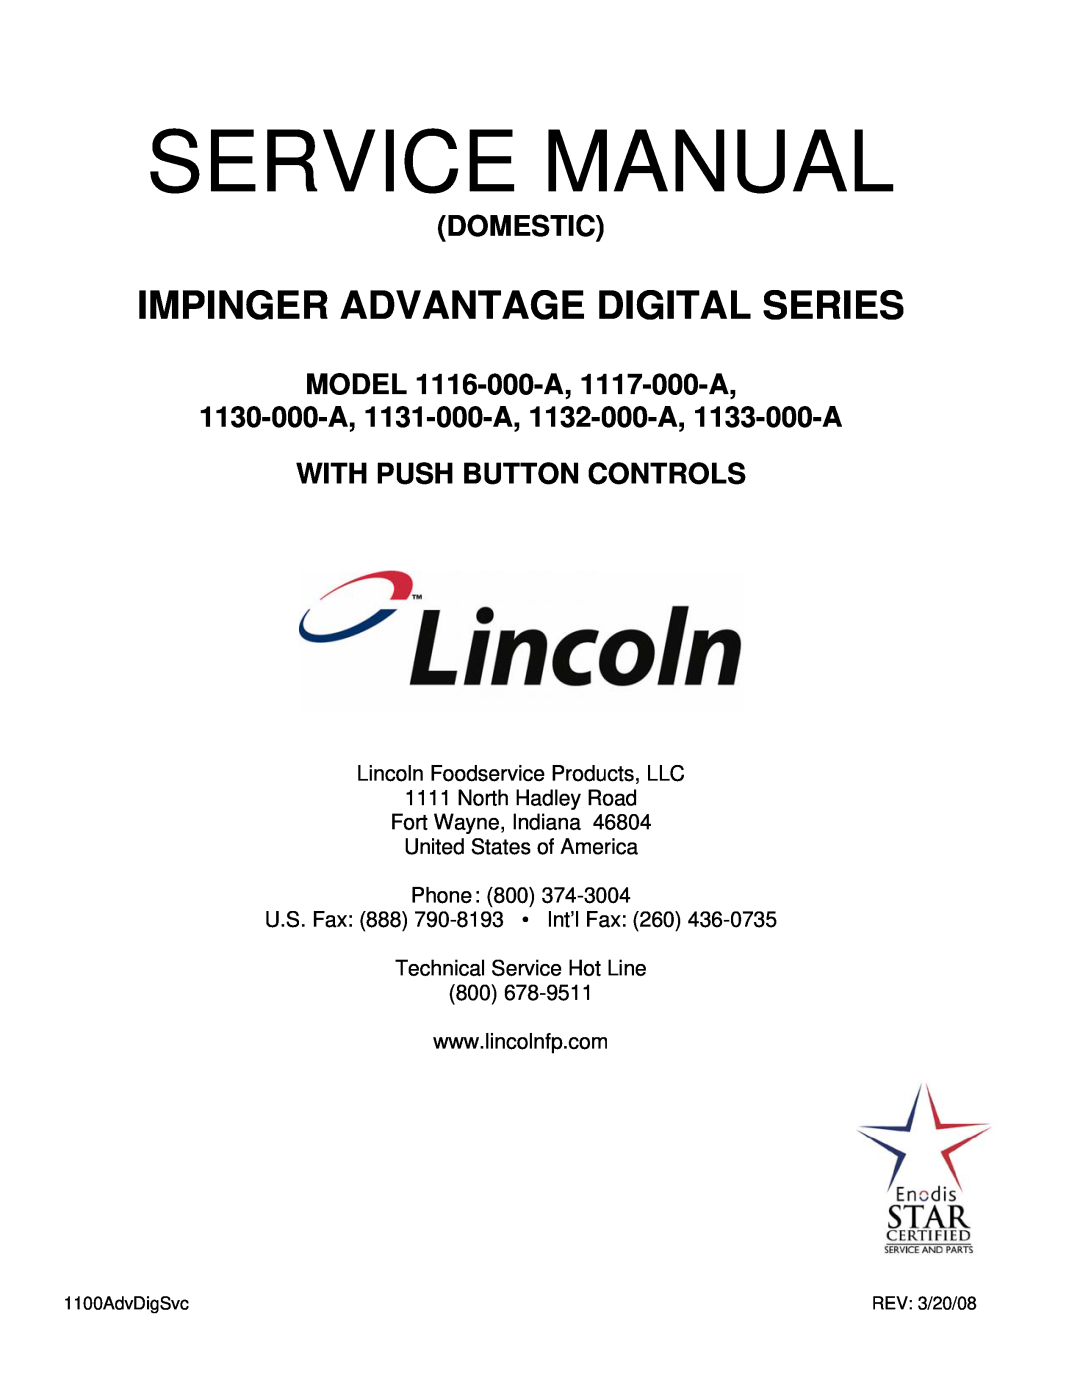 Lincoln 116-000-A service manual Lincoln Foodservice Products, LLC, North Hadley Road Fort Wayne, Indiana, Domestic 